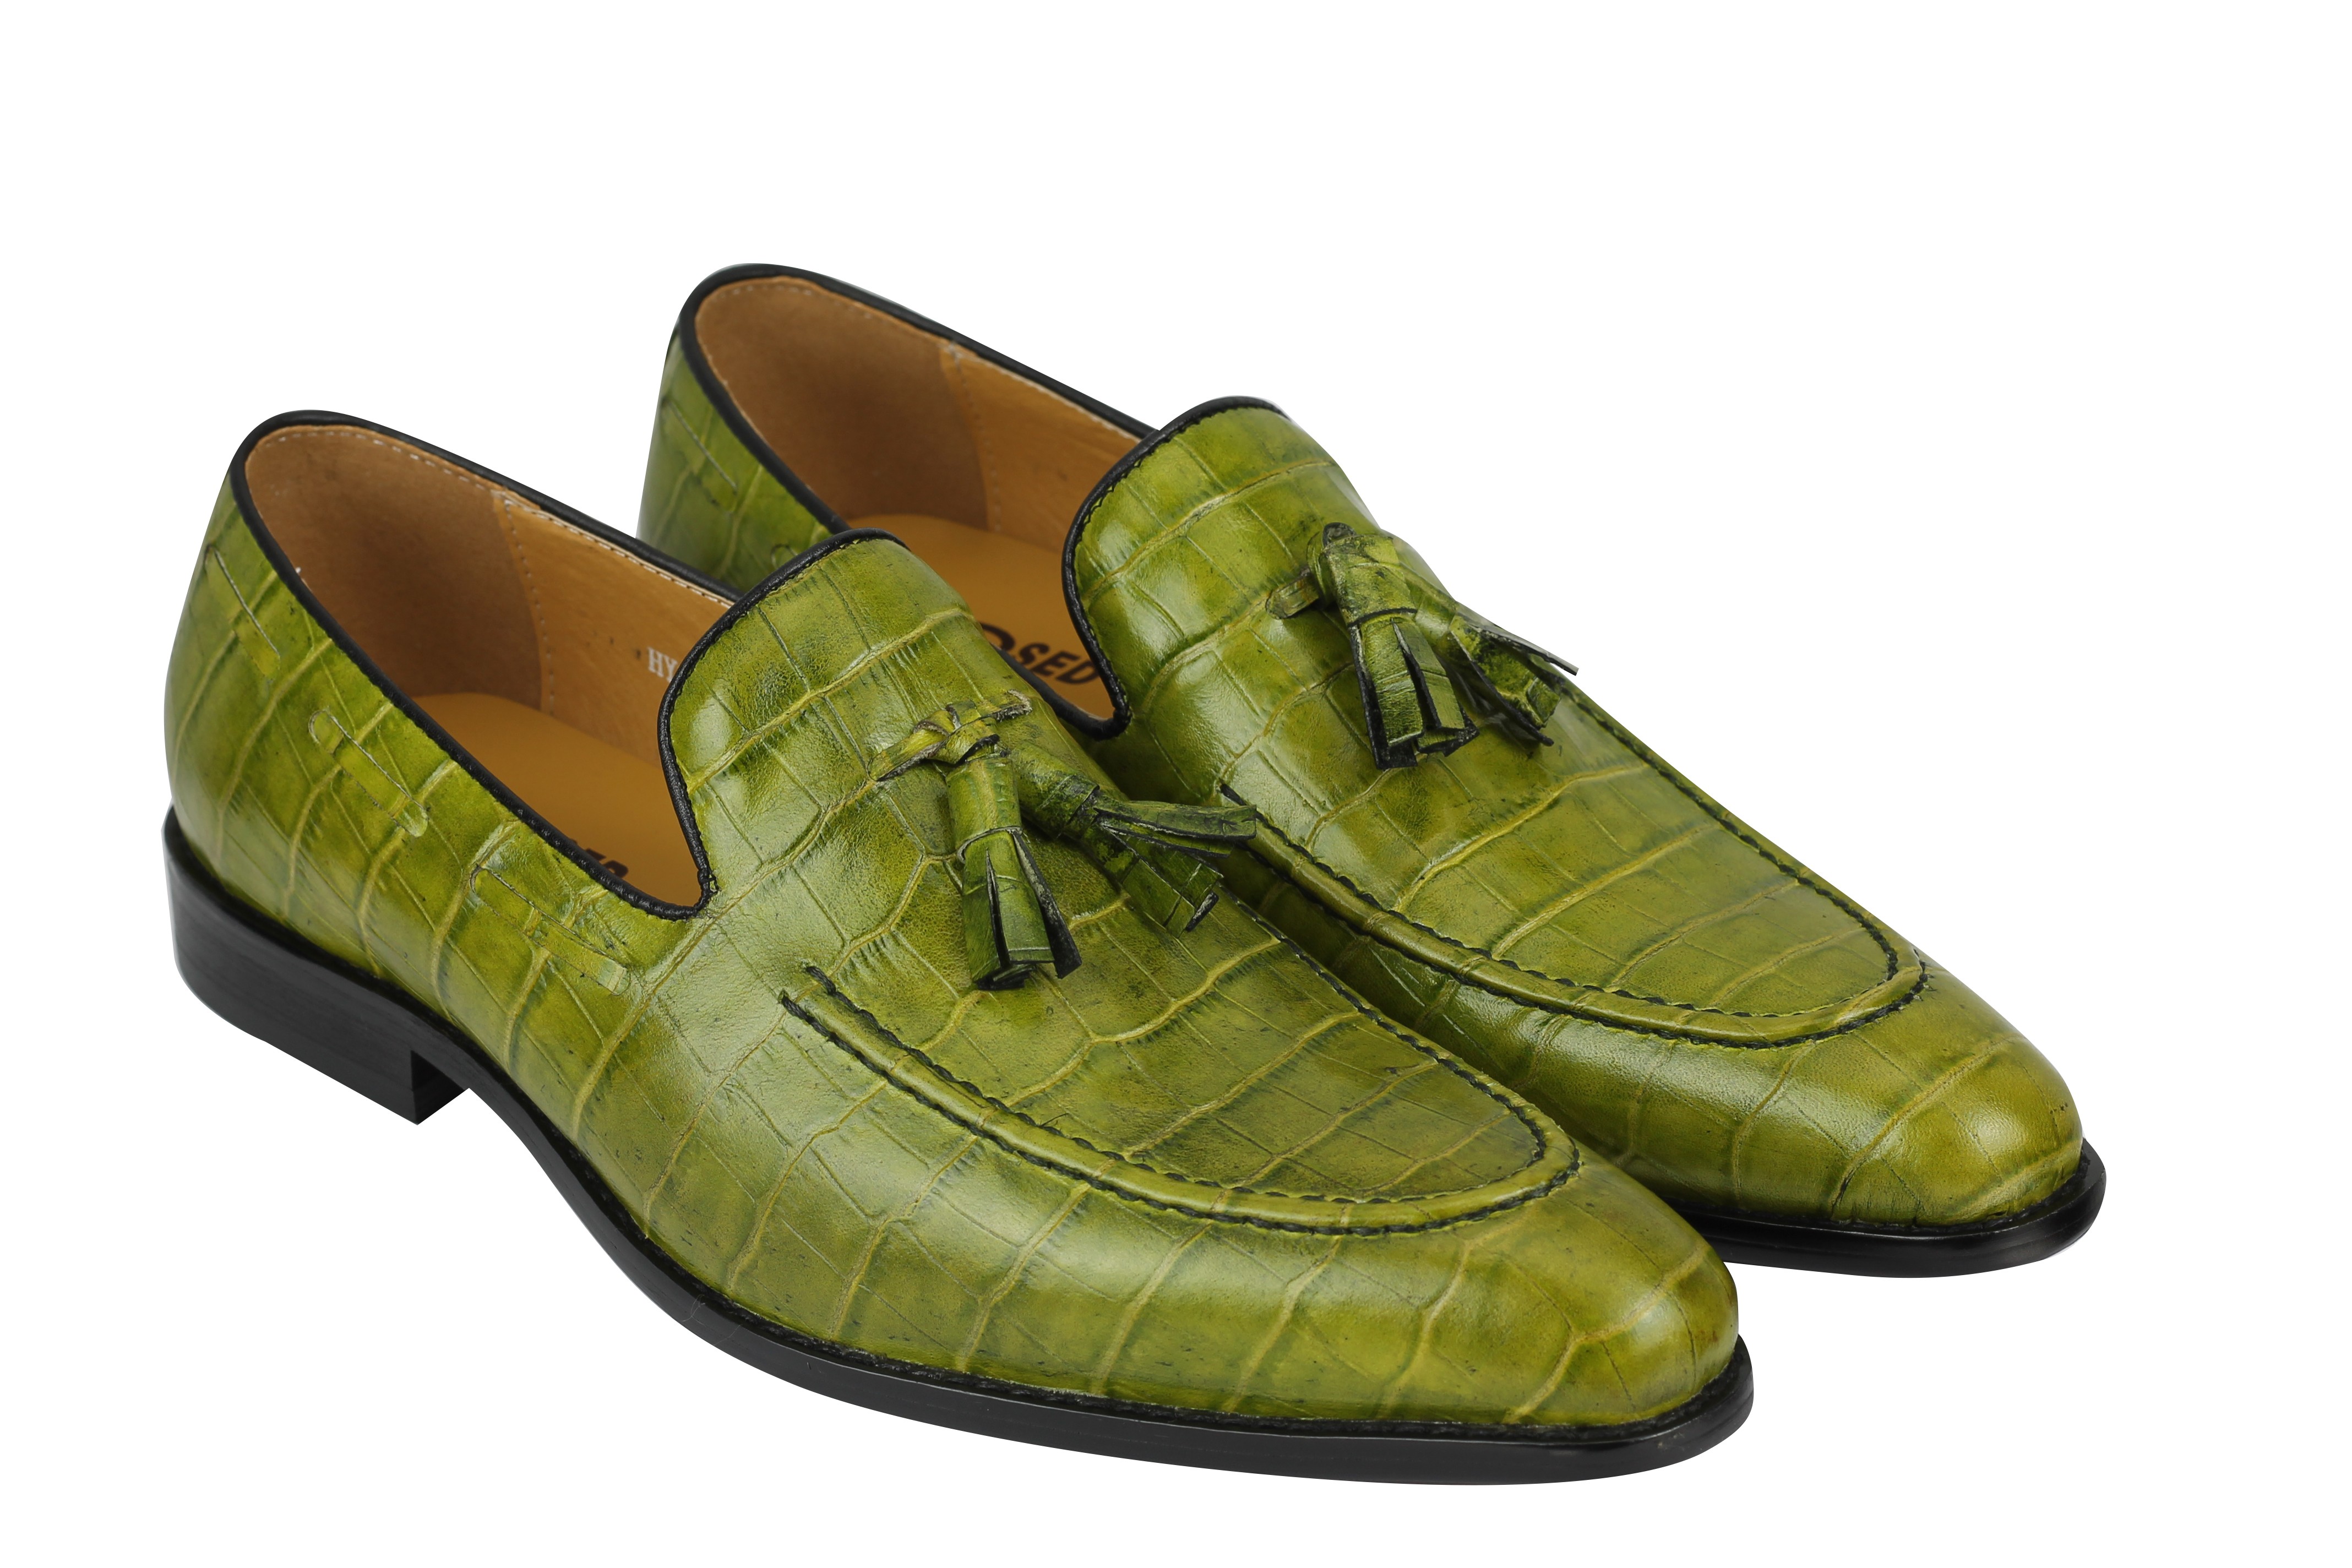 Mens Crocodile Print Shiny Real Leather Tassel Loafers Shoes Vintage Green Black